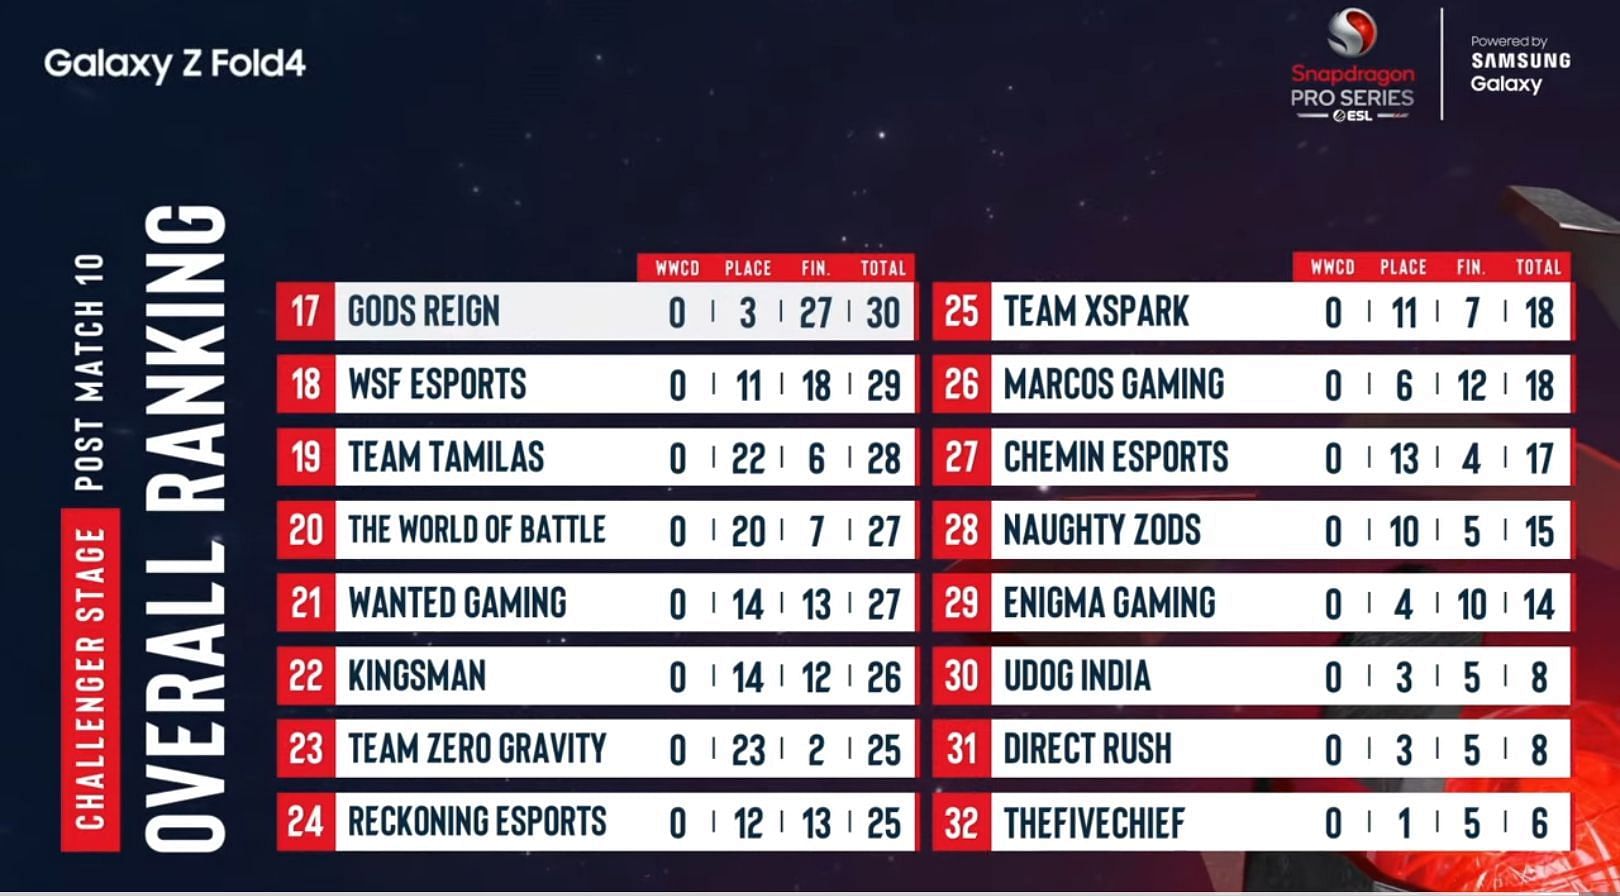 Team XSpark finished 25th after PUBG New State Mobile Challenger Day 2 (Image via Nodwin Gaming)